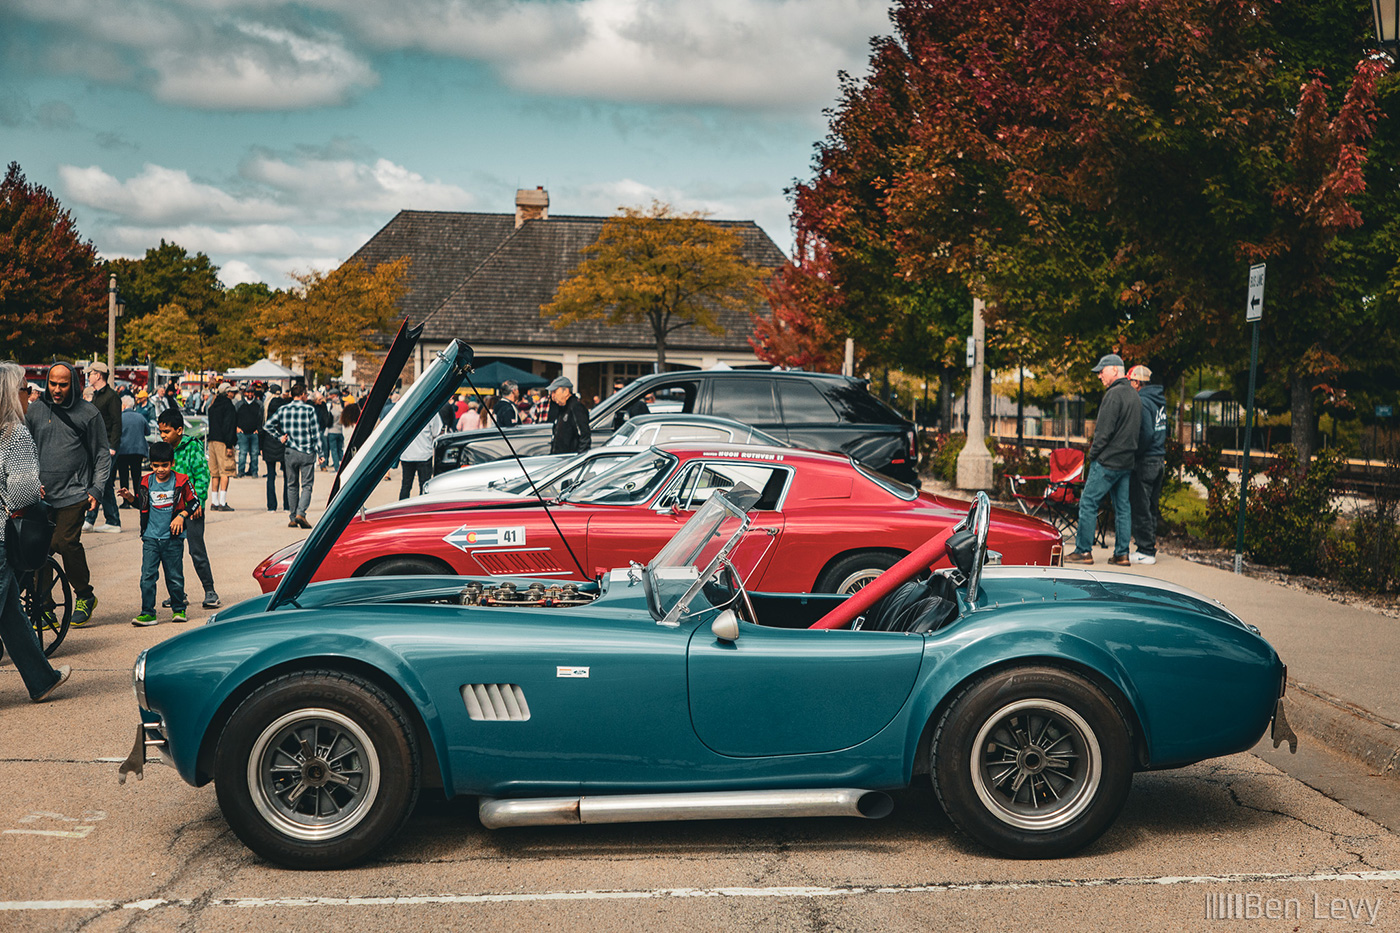 1964 Shelby Cobra 289 Roadster at Lake Forest Then & Now Auto Show